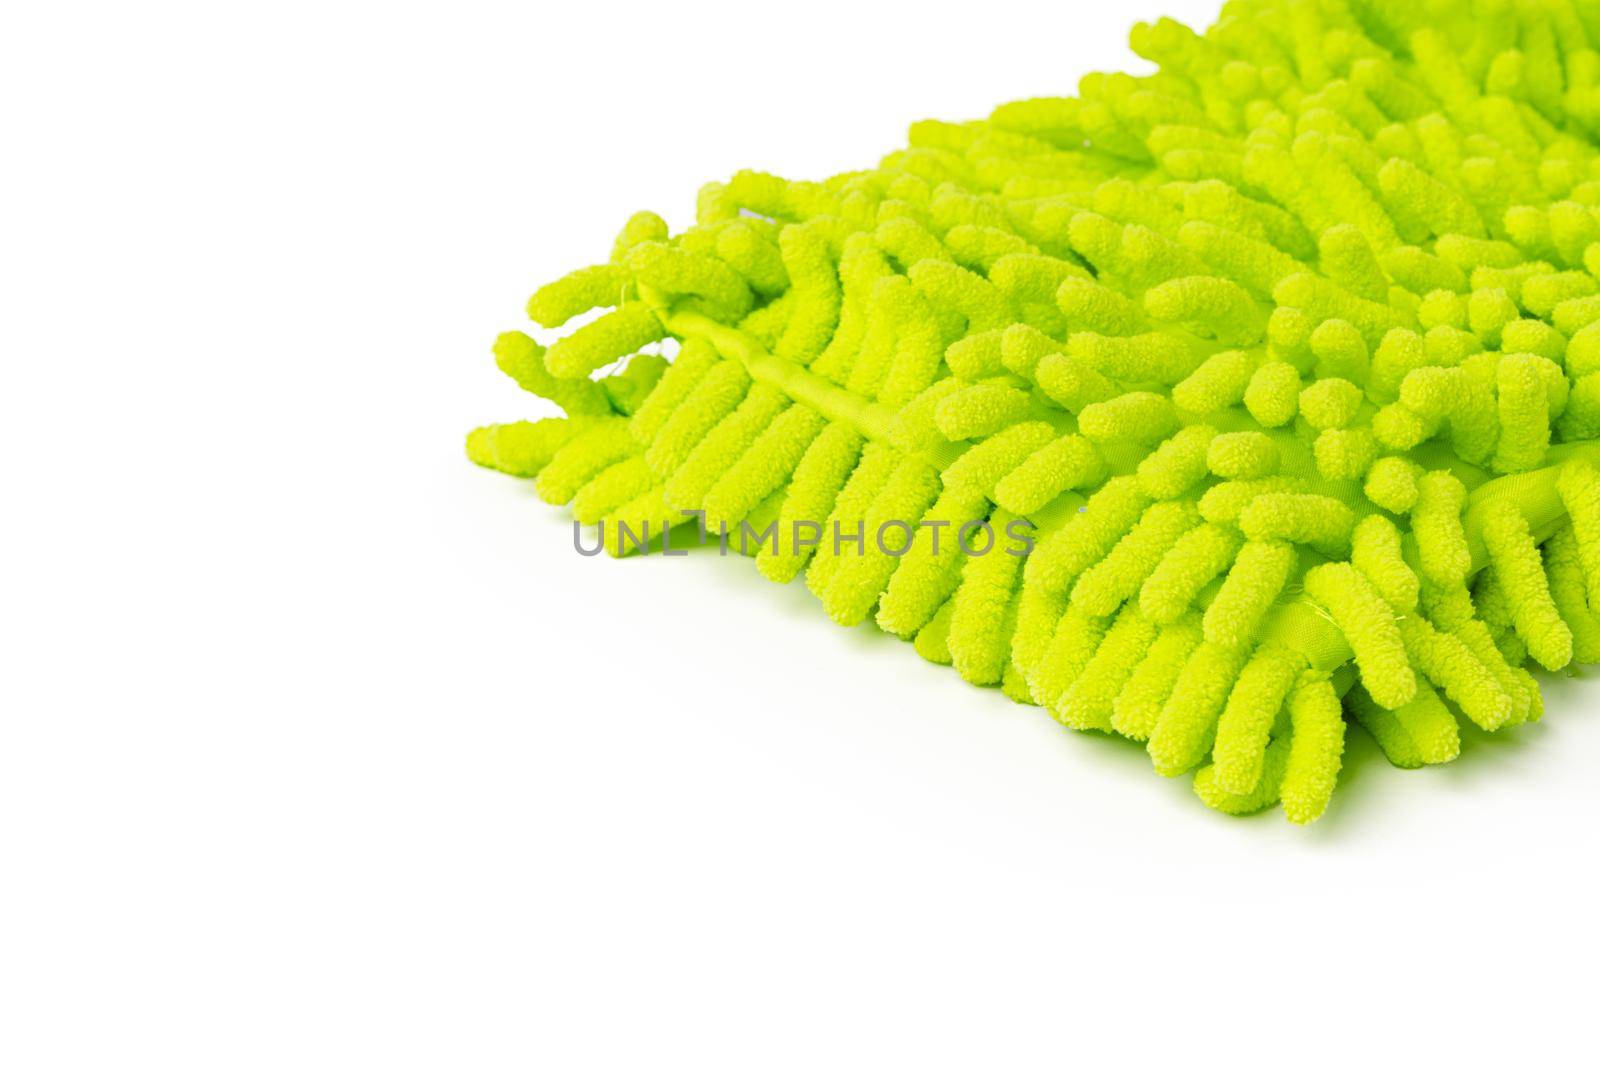 Cleaning floor mop isolated on white background, close up